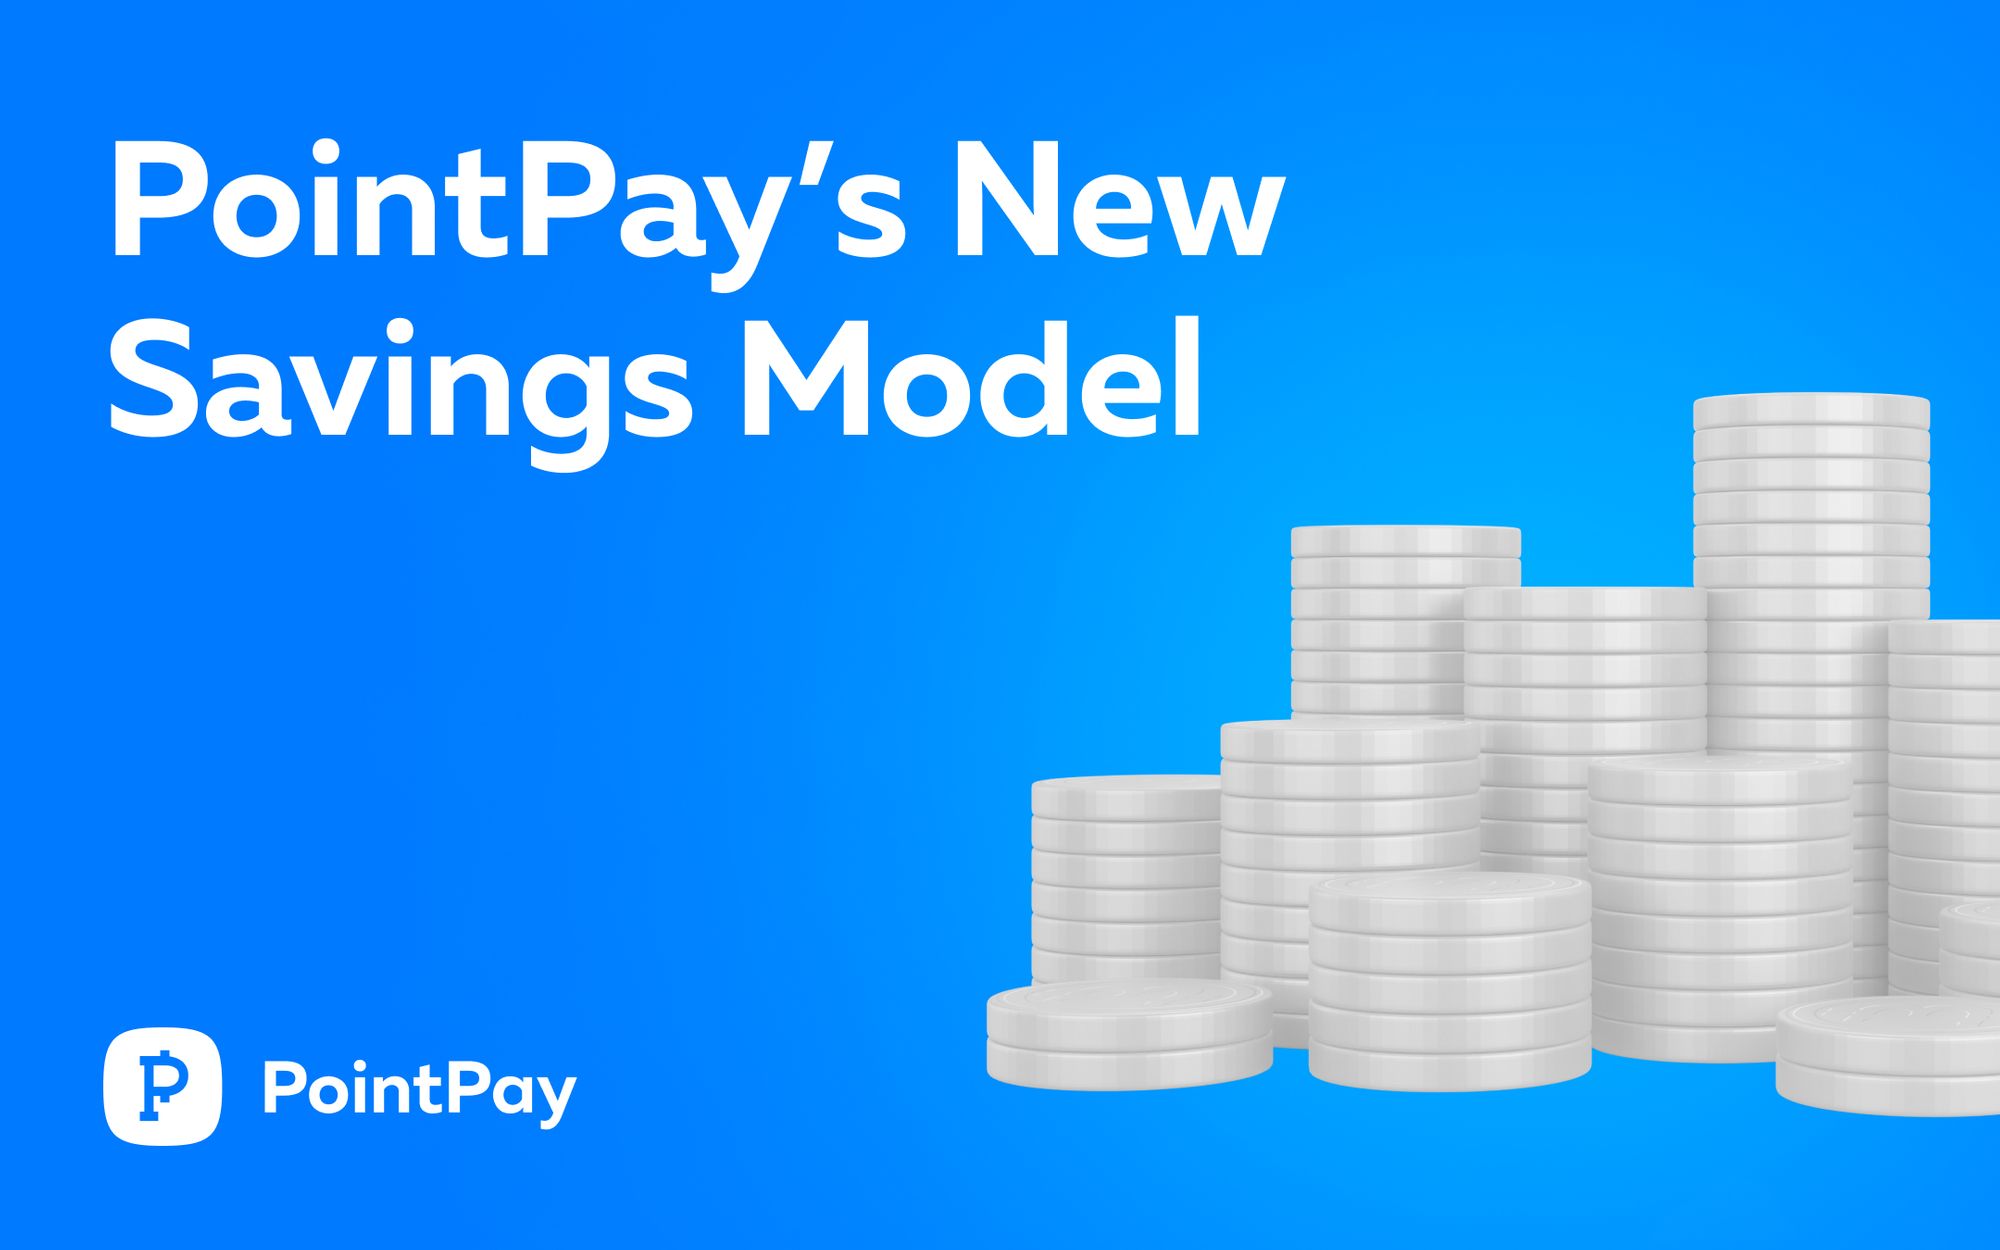 PointPay’s New Savings Model